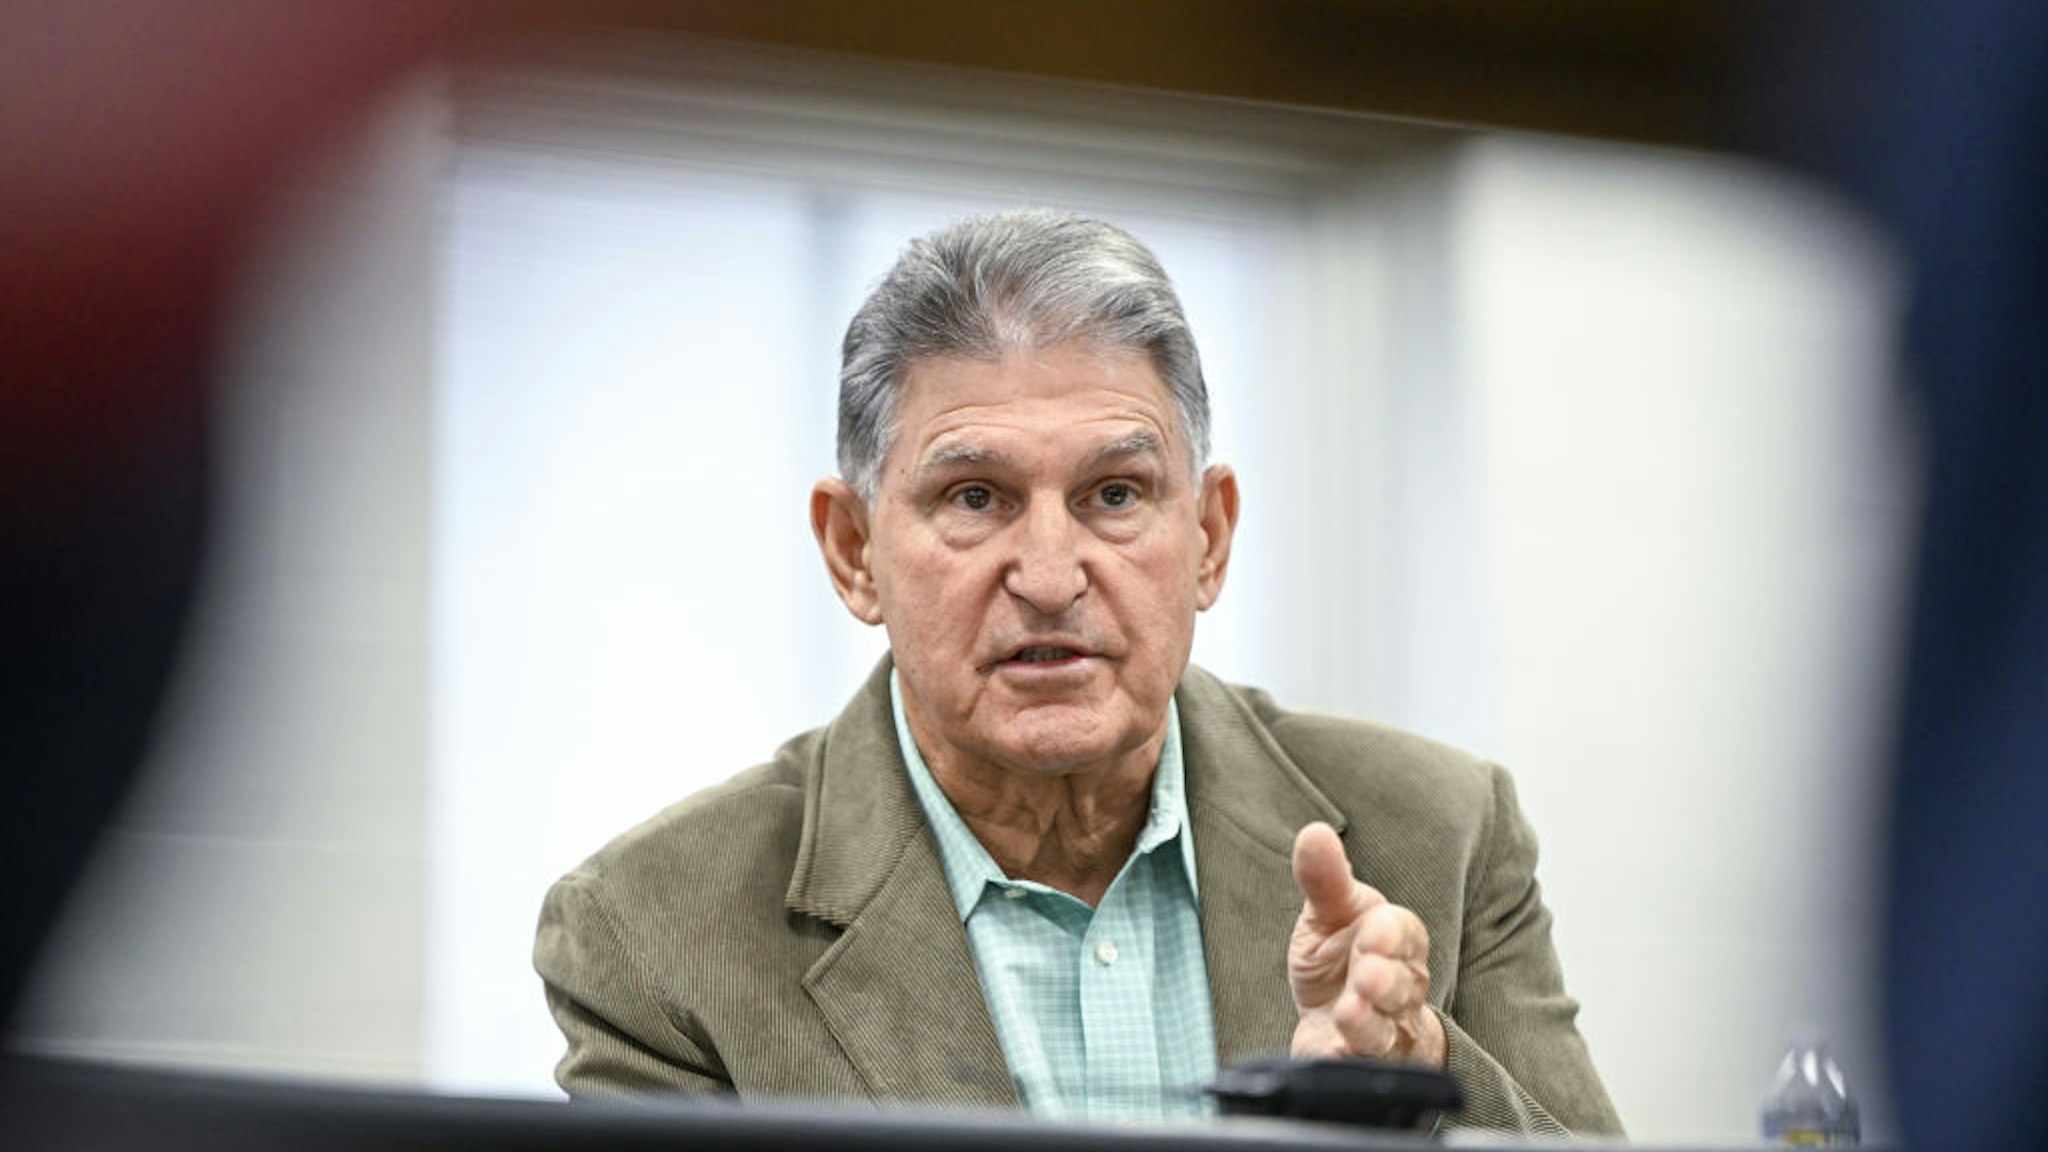 Senator Joe Manchin, a Democrat from West Virginia, speaks during a community listening session at Piketon High School in Piketon, Ohio, US, on Thursday, Oct. 20, 2022. Ohio US Democrat Senate candidate Tim Ryan and Manchin discussed issues pertaining to the Portsmouth Gaseous Diffusion Plant (PORTS) and the 2020 closure of Zahns Corner Middle School after radioactive material was detected at the site. Photographer: Gaelen Morse/Bloomberg via Getty Images